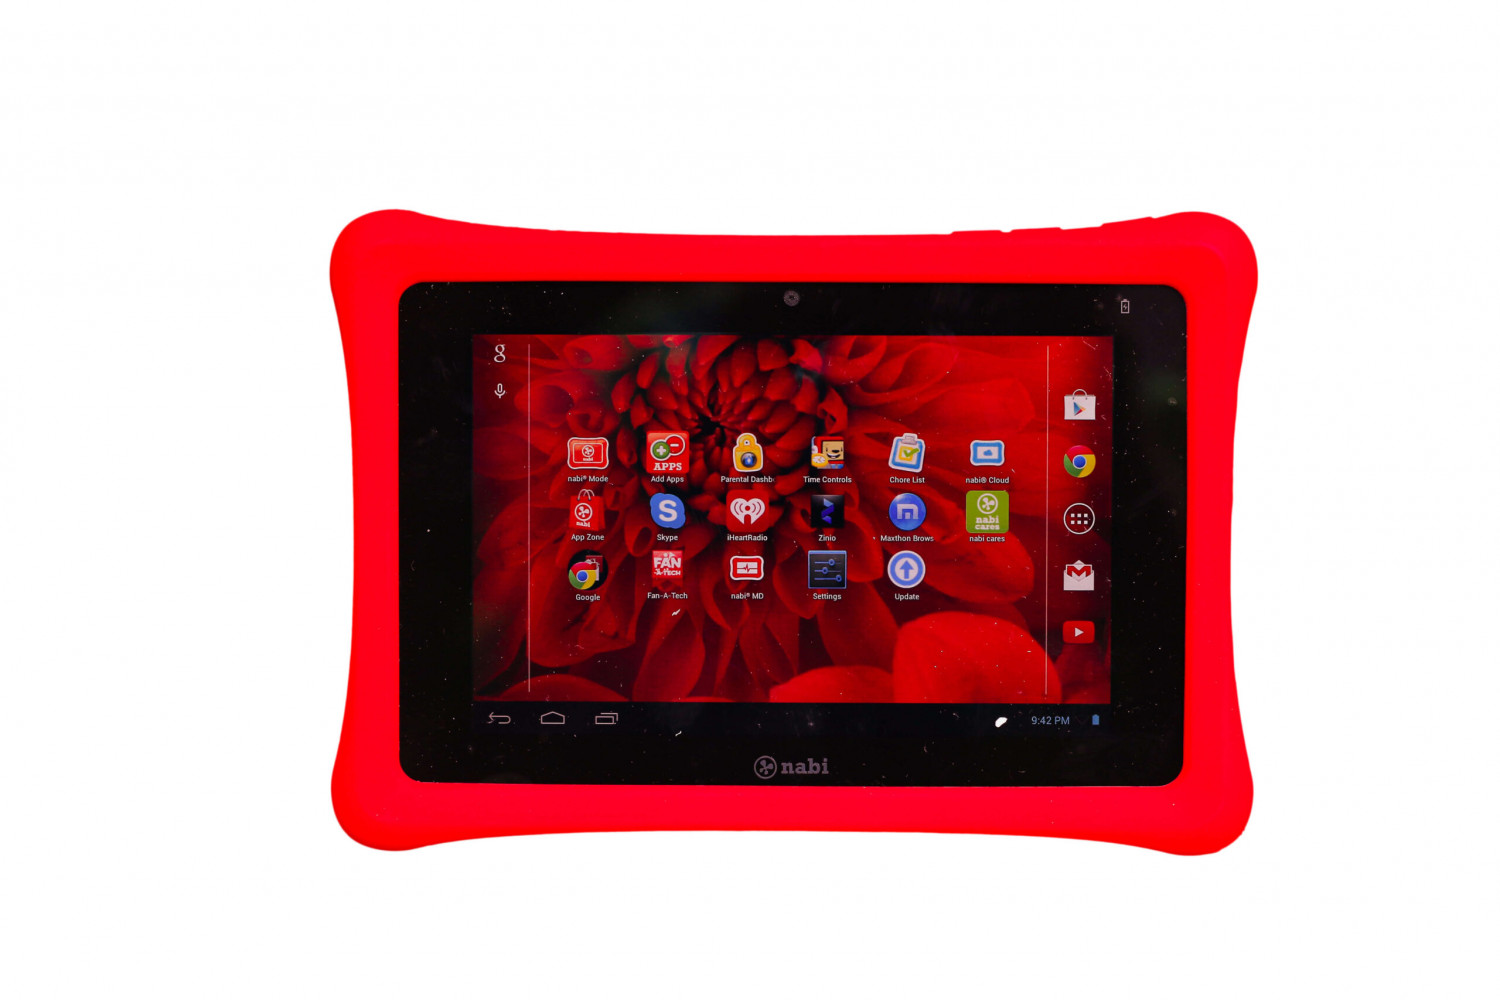 How To Reset A Nabi Tablet